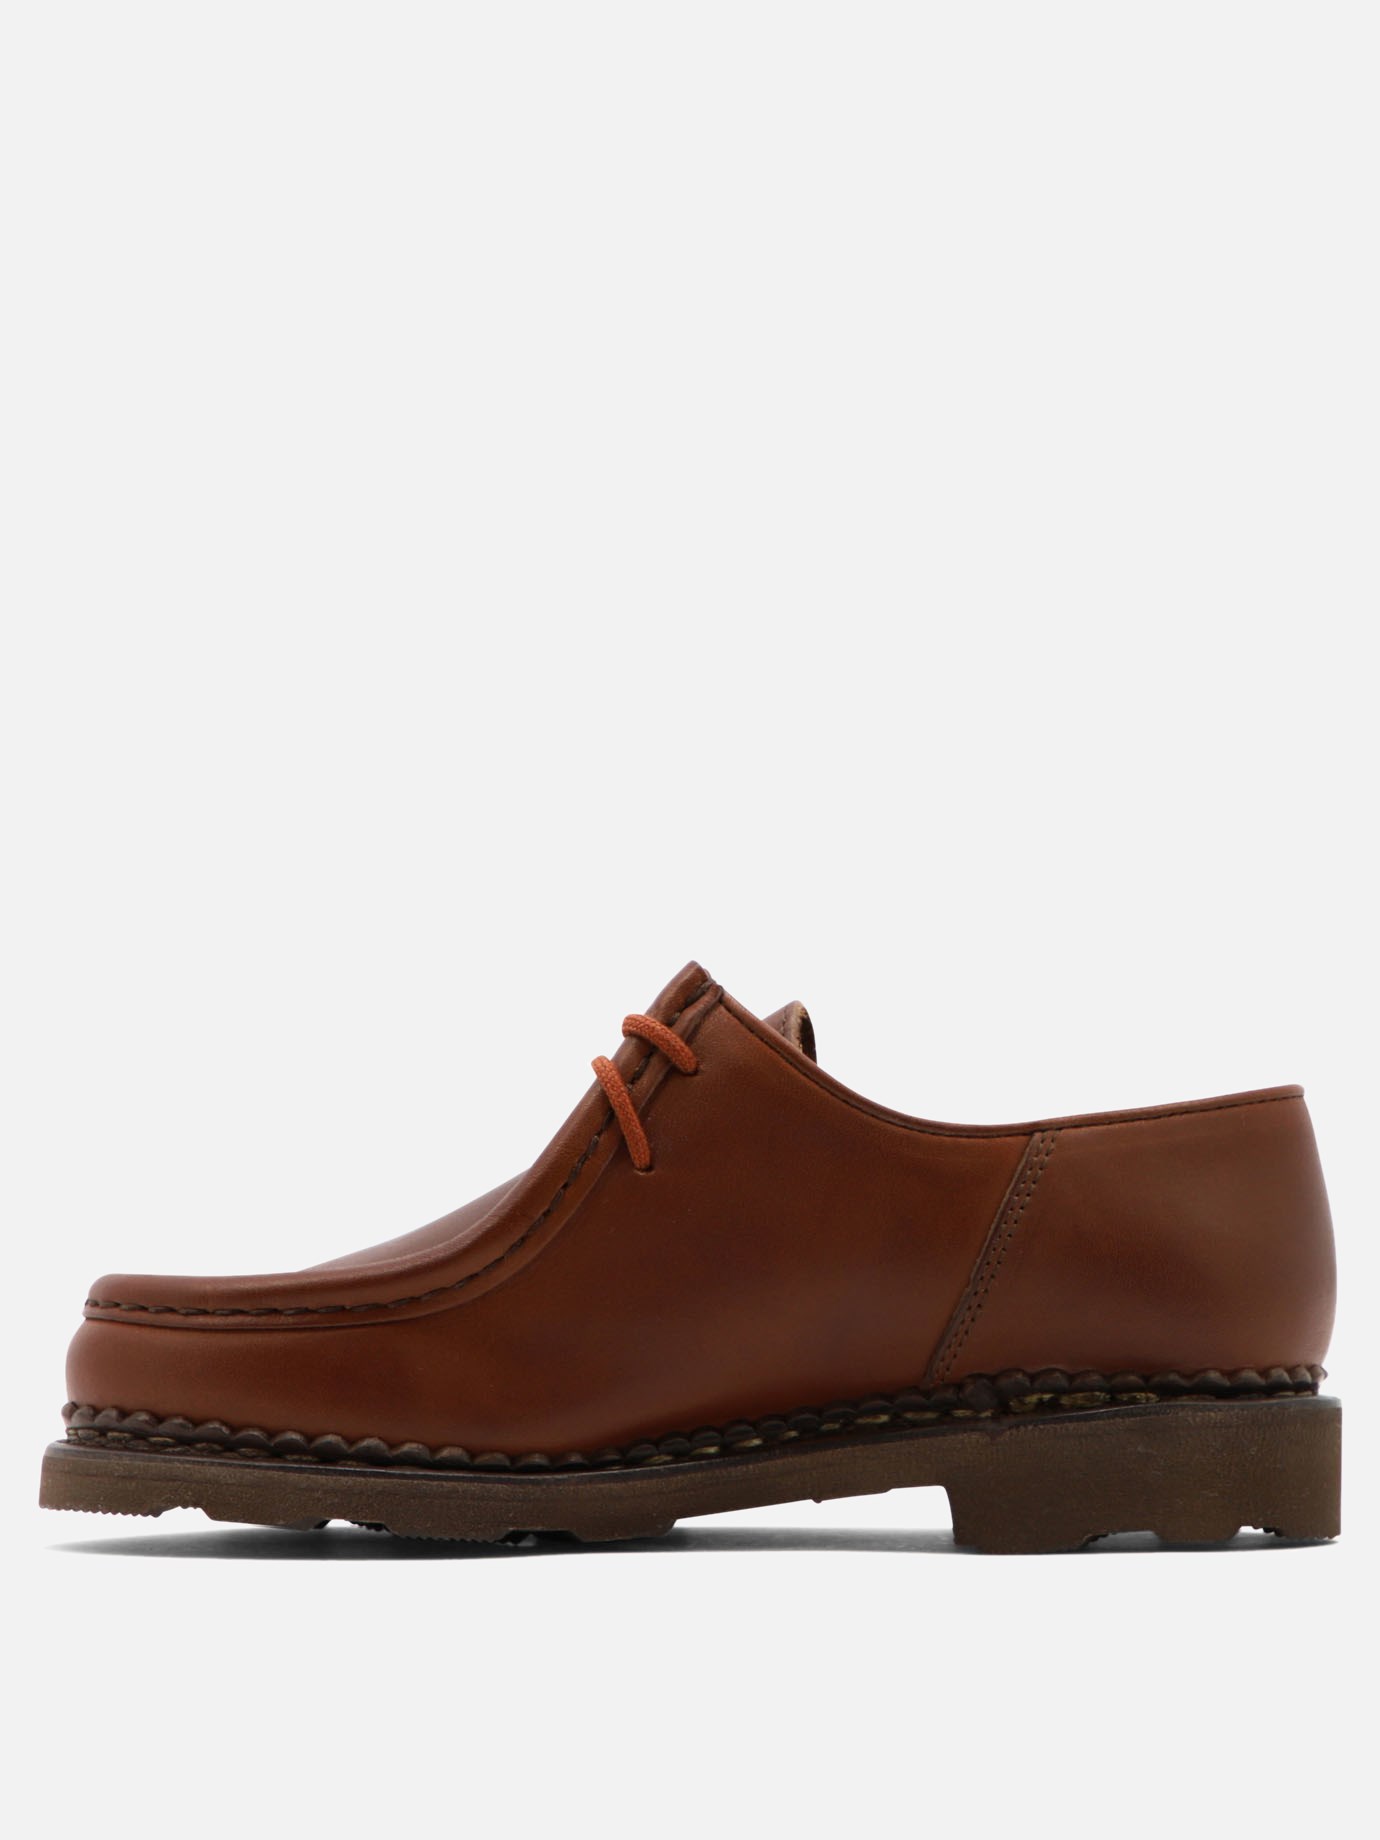  Michael Marche II  lace-up shoes by Paraboot